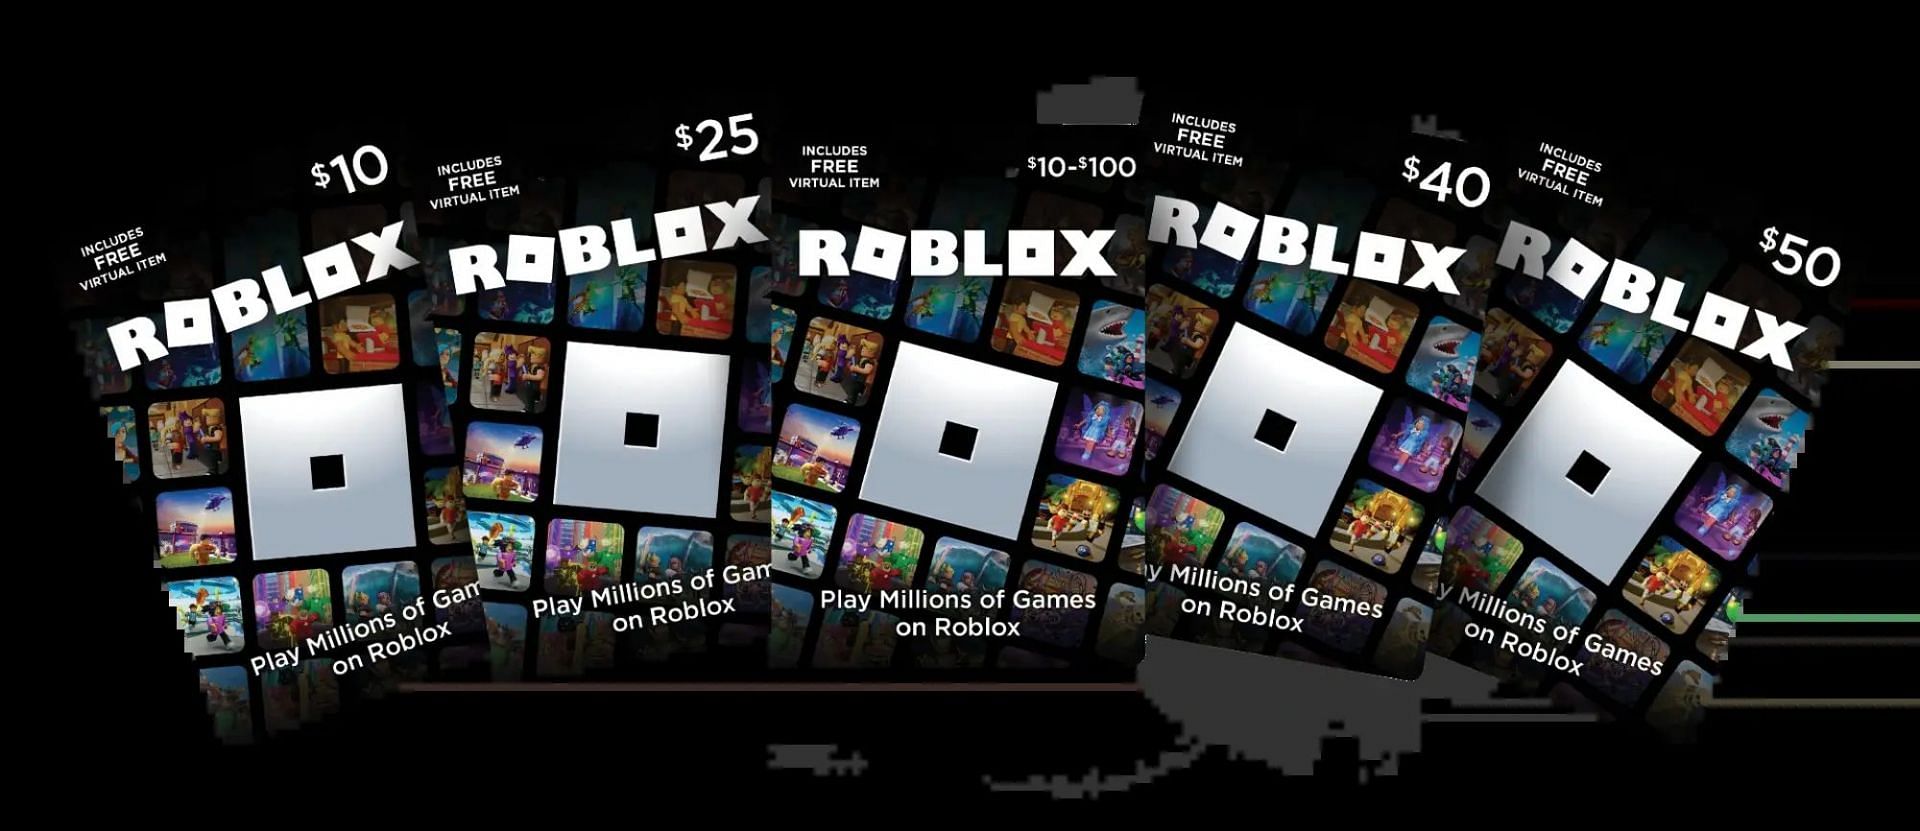 How to Redeem a Roblox Gift Card in 2 Different Ways